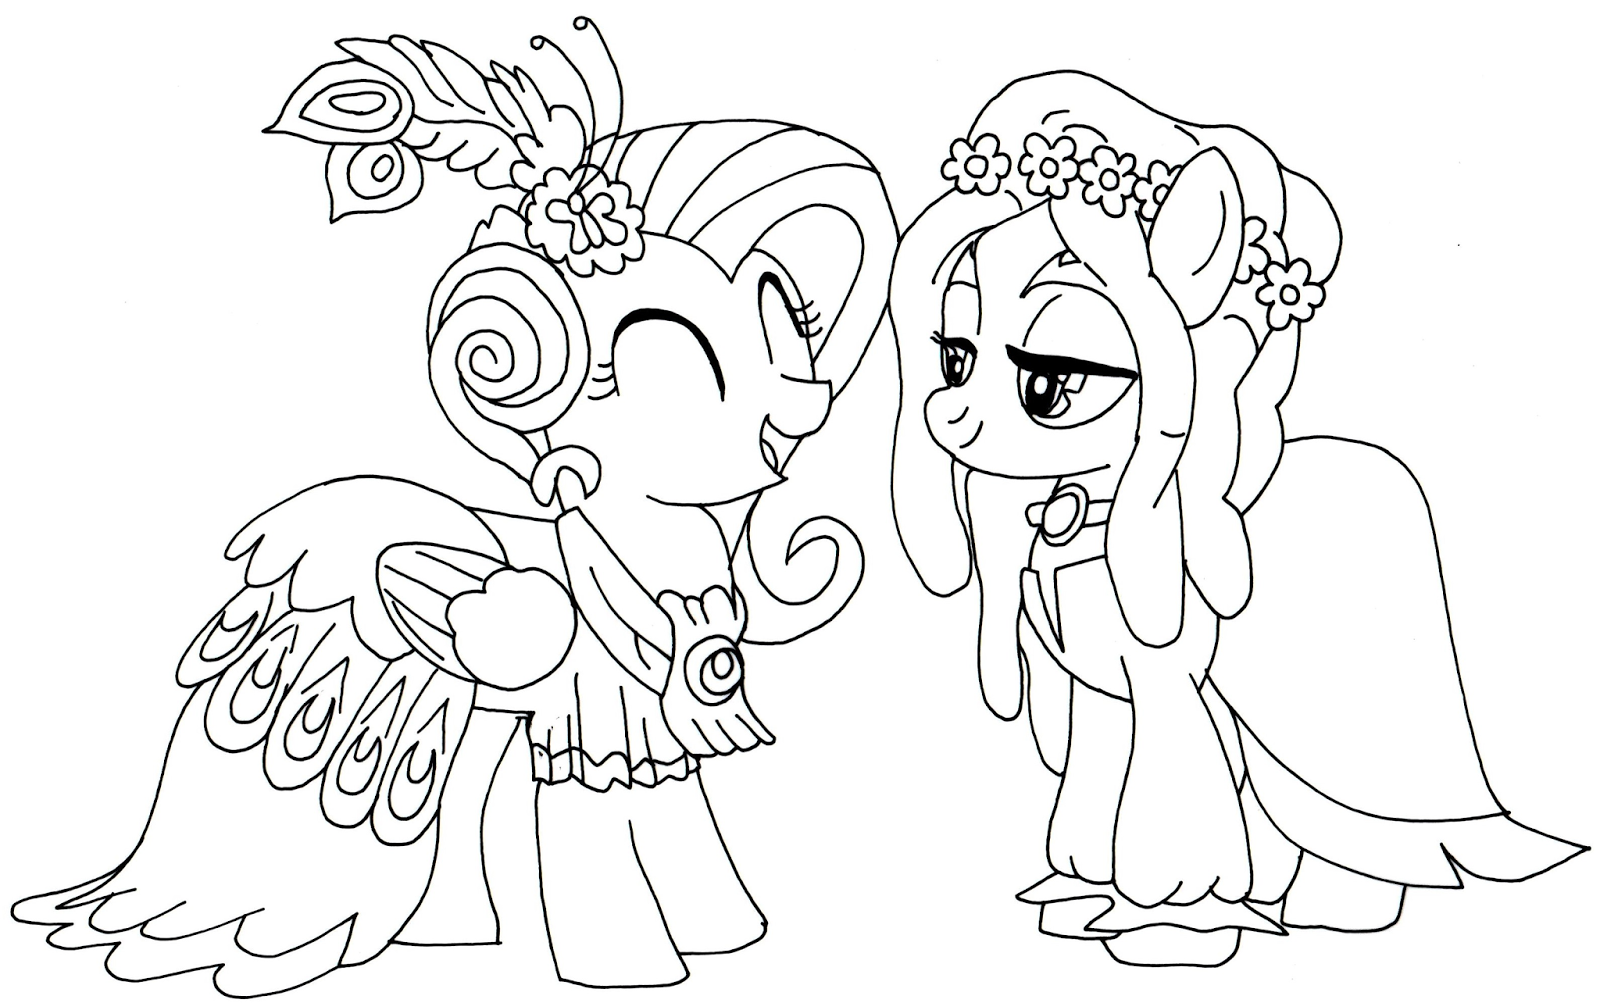 Free Fluttershy Printable Coloring Pages, Download Free Fluttershy